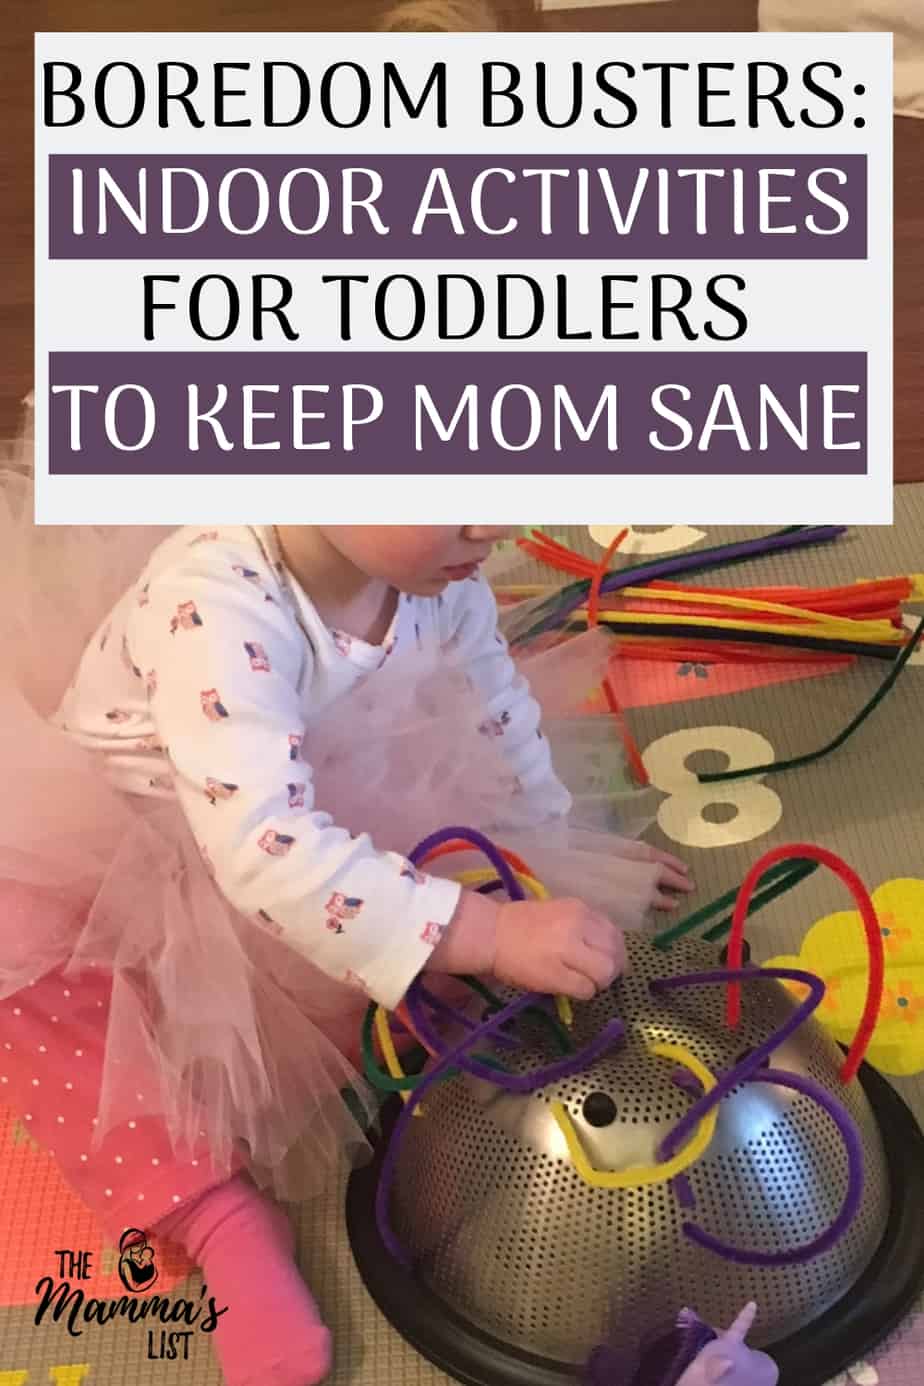 Being stuck inside is NOT fun when you have a toddler. Luckily there are a few boredom busting indoor activities you can do with your toddler that will keep you sane when you can't get out. These activities are toddler approved and will keep you having fun no matter what the weather's like outside.